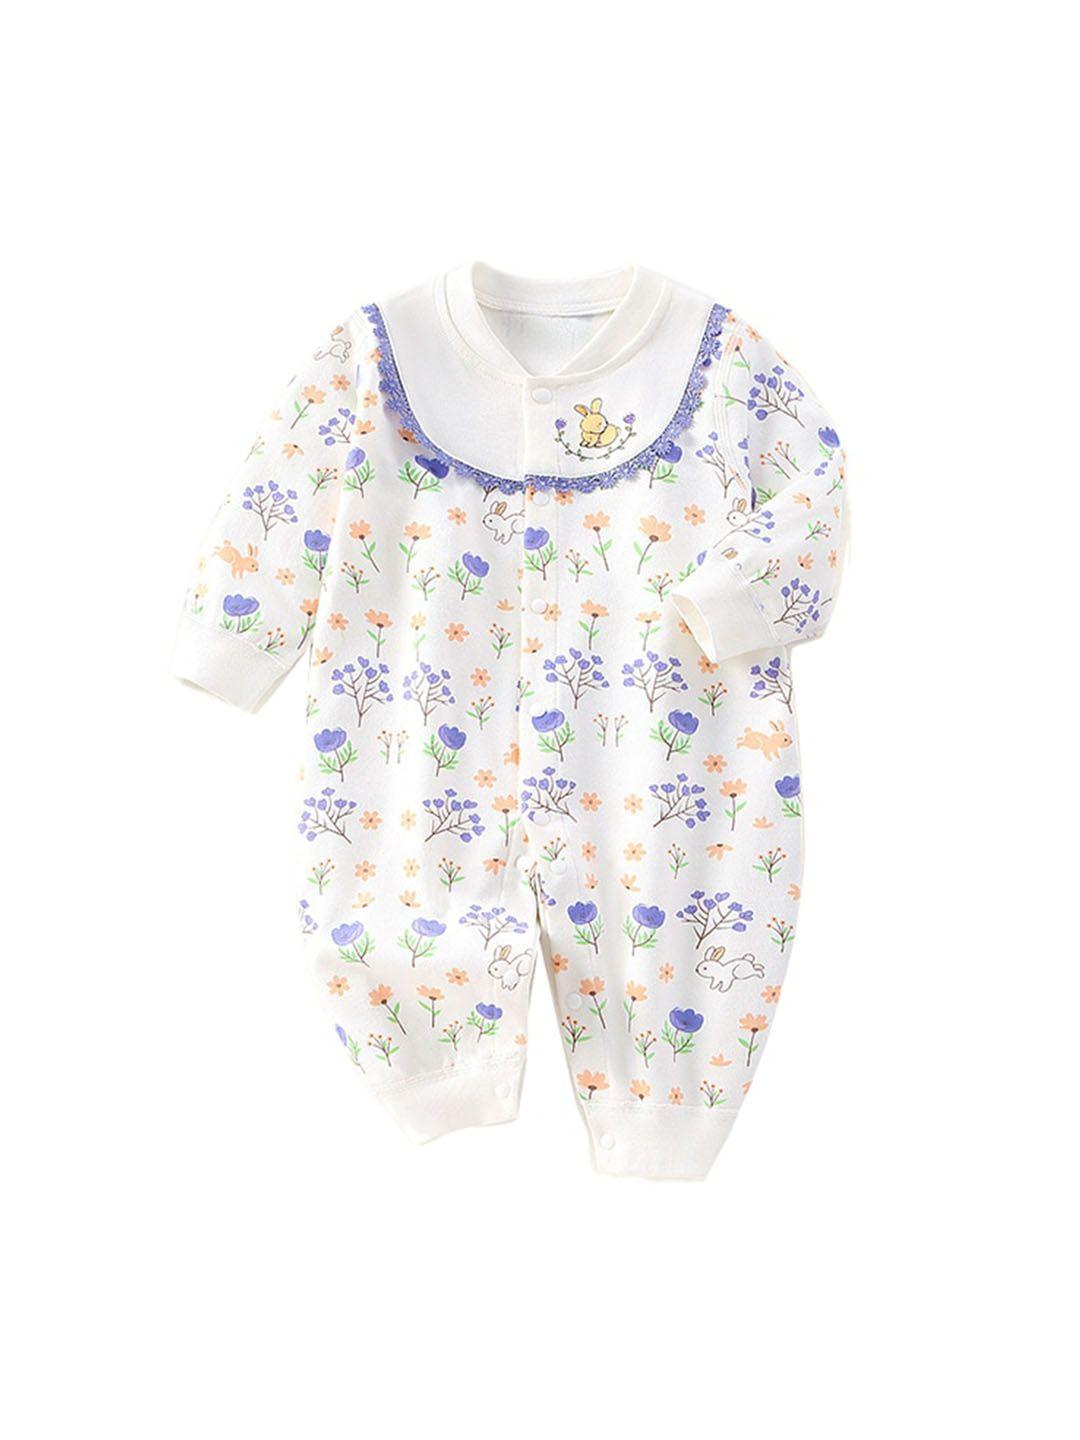 stylecast infant girls printed cotton rompers